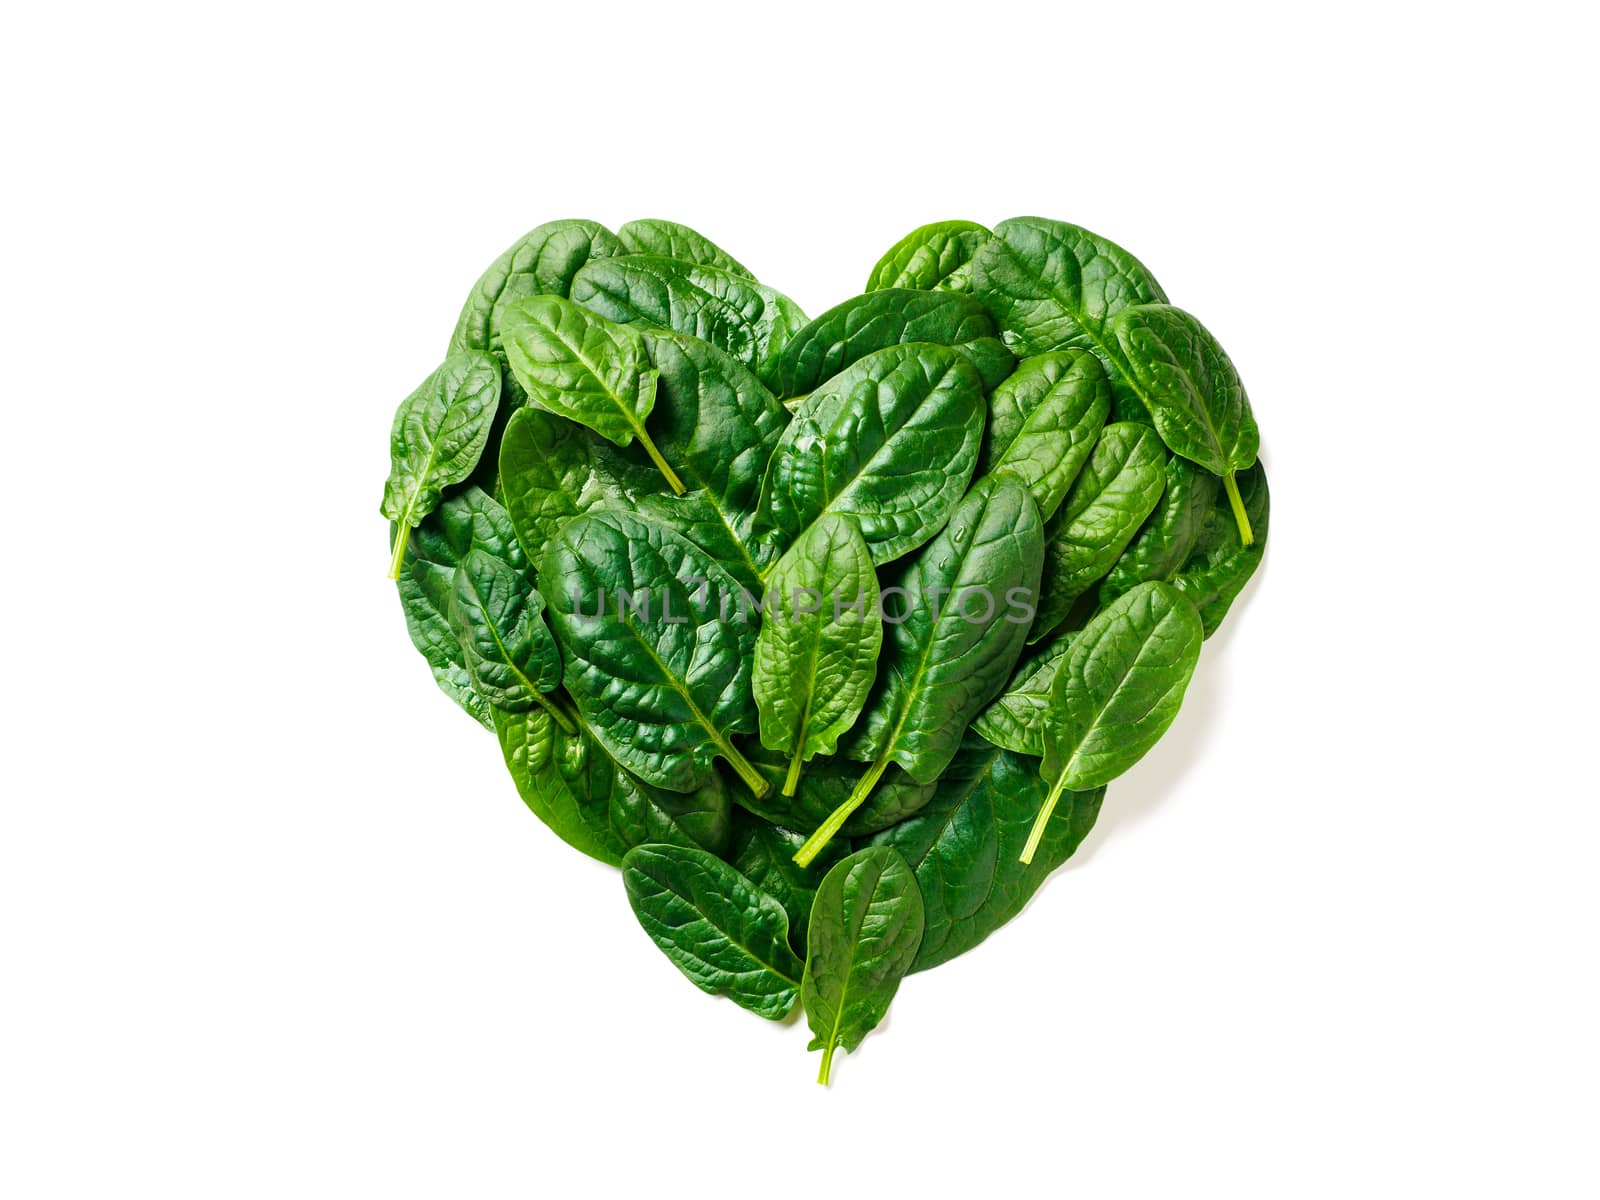 Heart shape made from spinach leaves. Spinach pattern isolated on white with clipping path. Creative layout from perfect fresh baby spinach leaves - heart health, vegan, low carb or keto diet concept